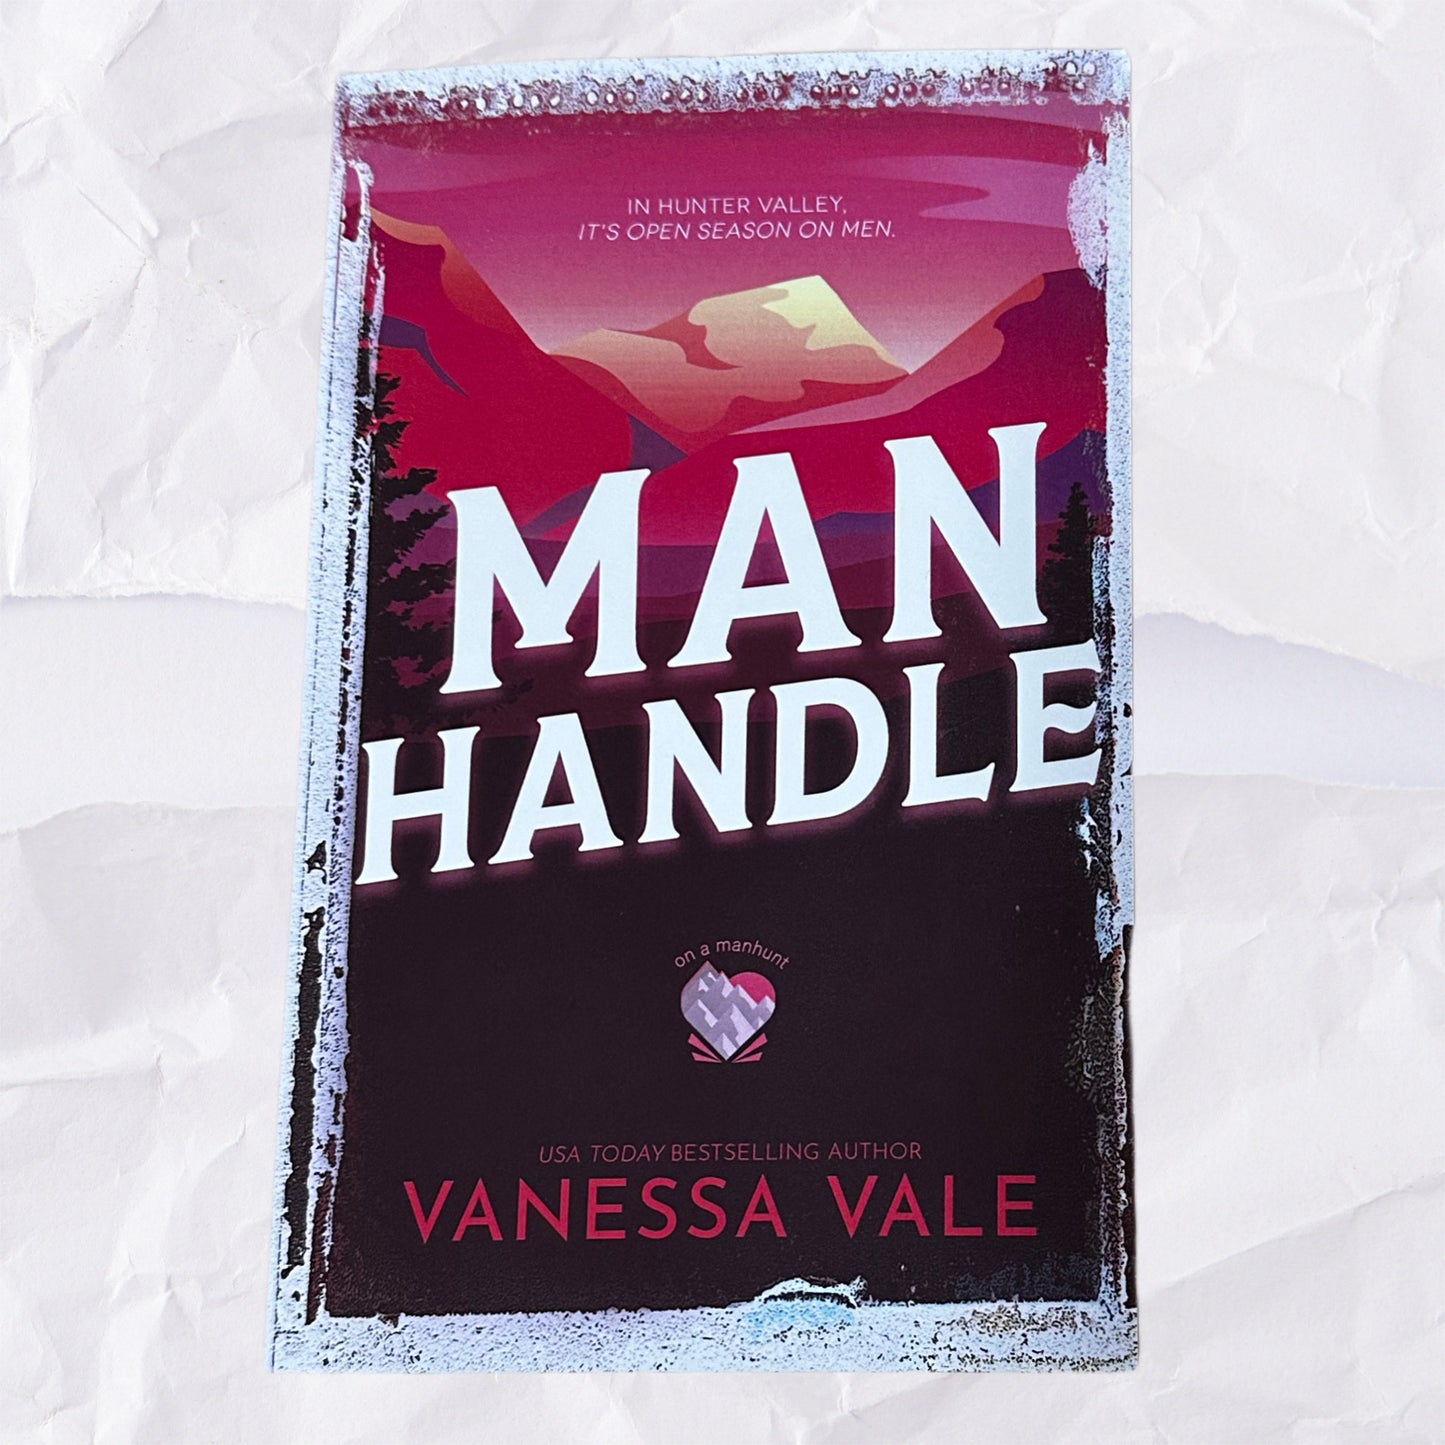 Man Handle (On a Manhunt #6) by Vanessa Vale